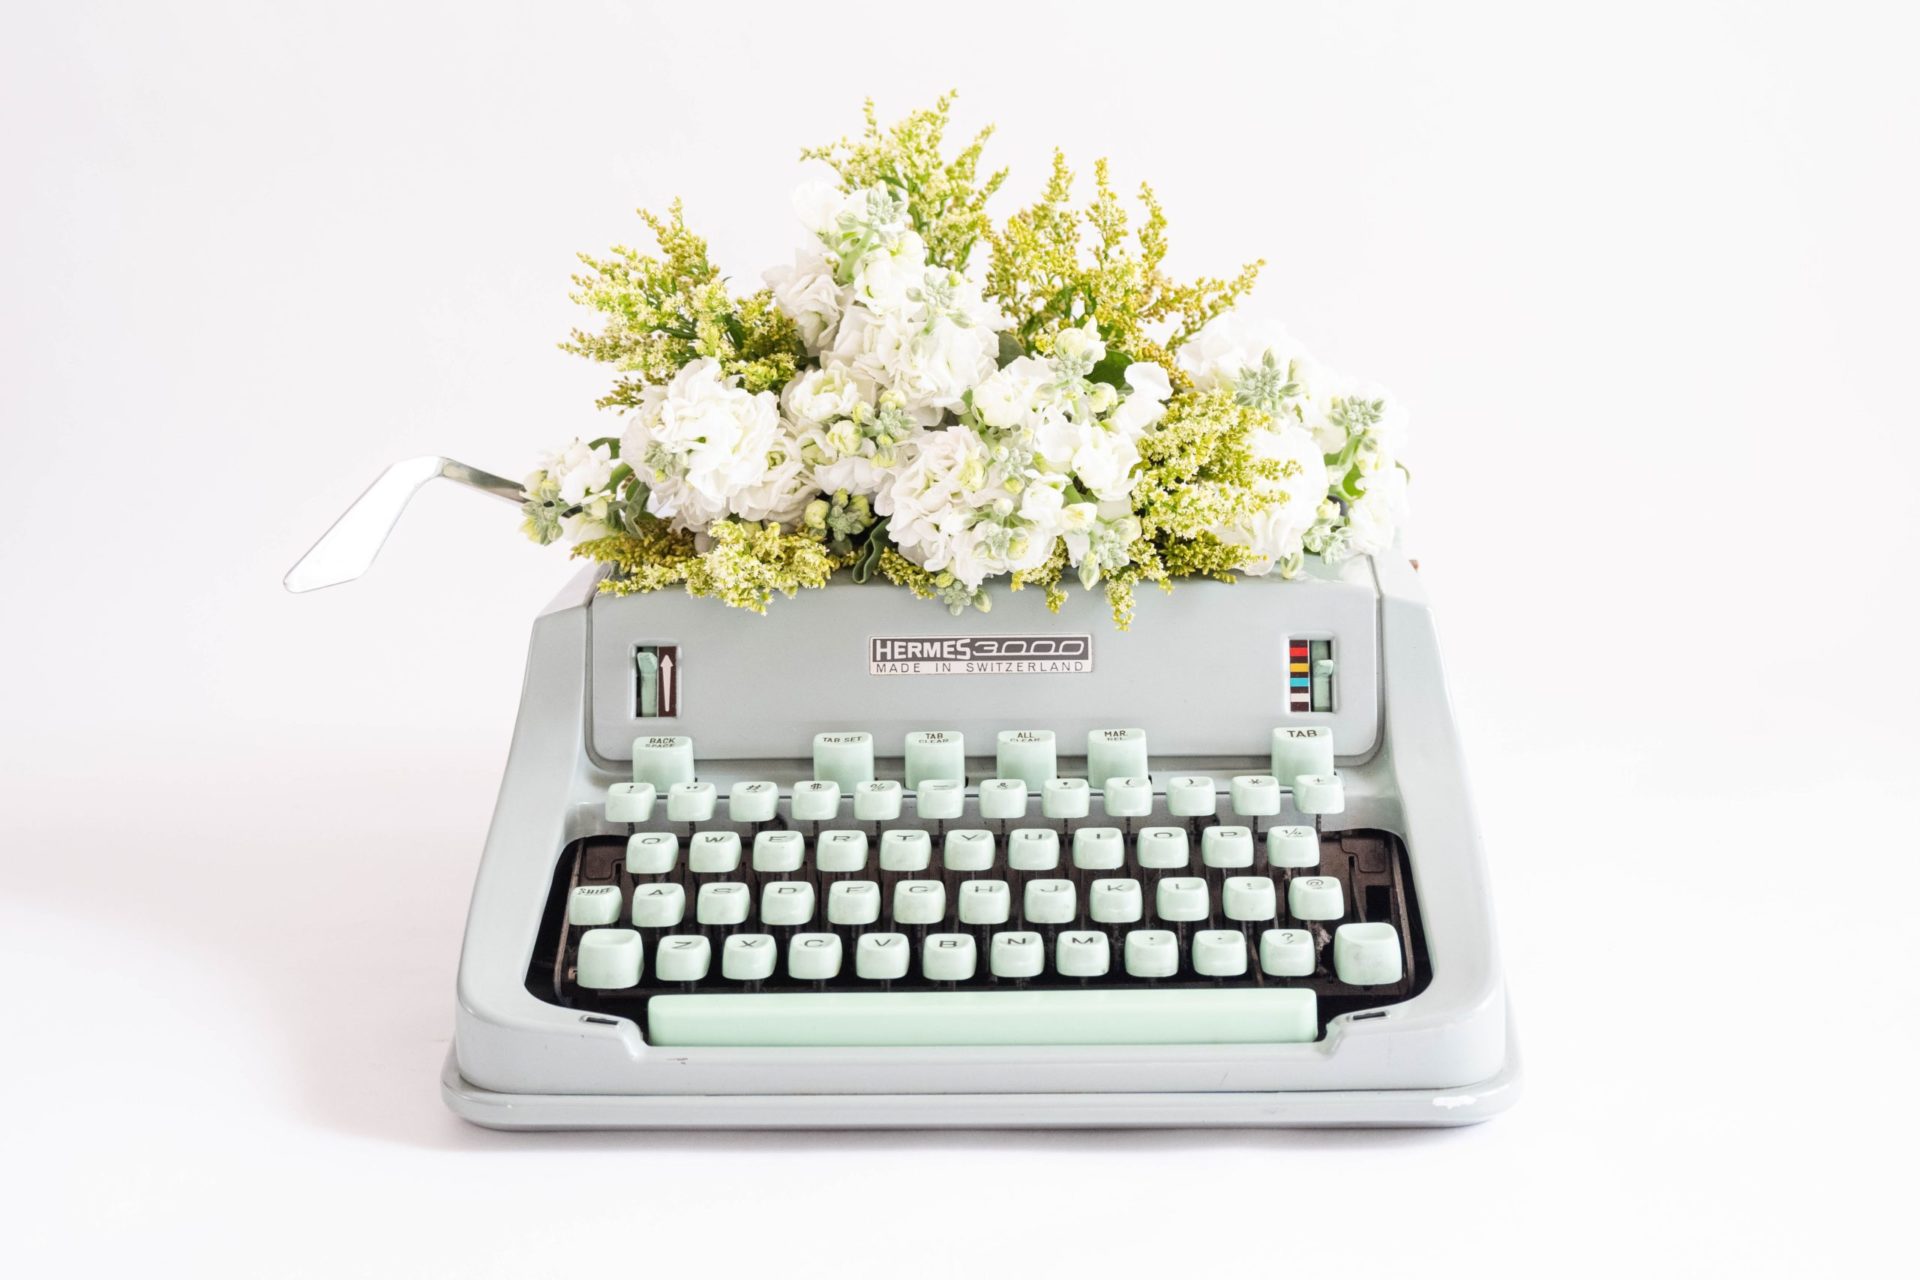 A light gray typewriter with pale blue keys sits on a white surface with white flowers and greenery poking out of the top.